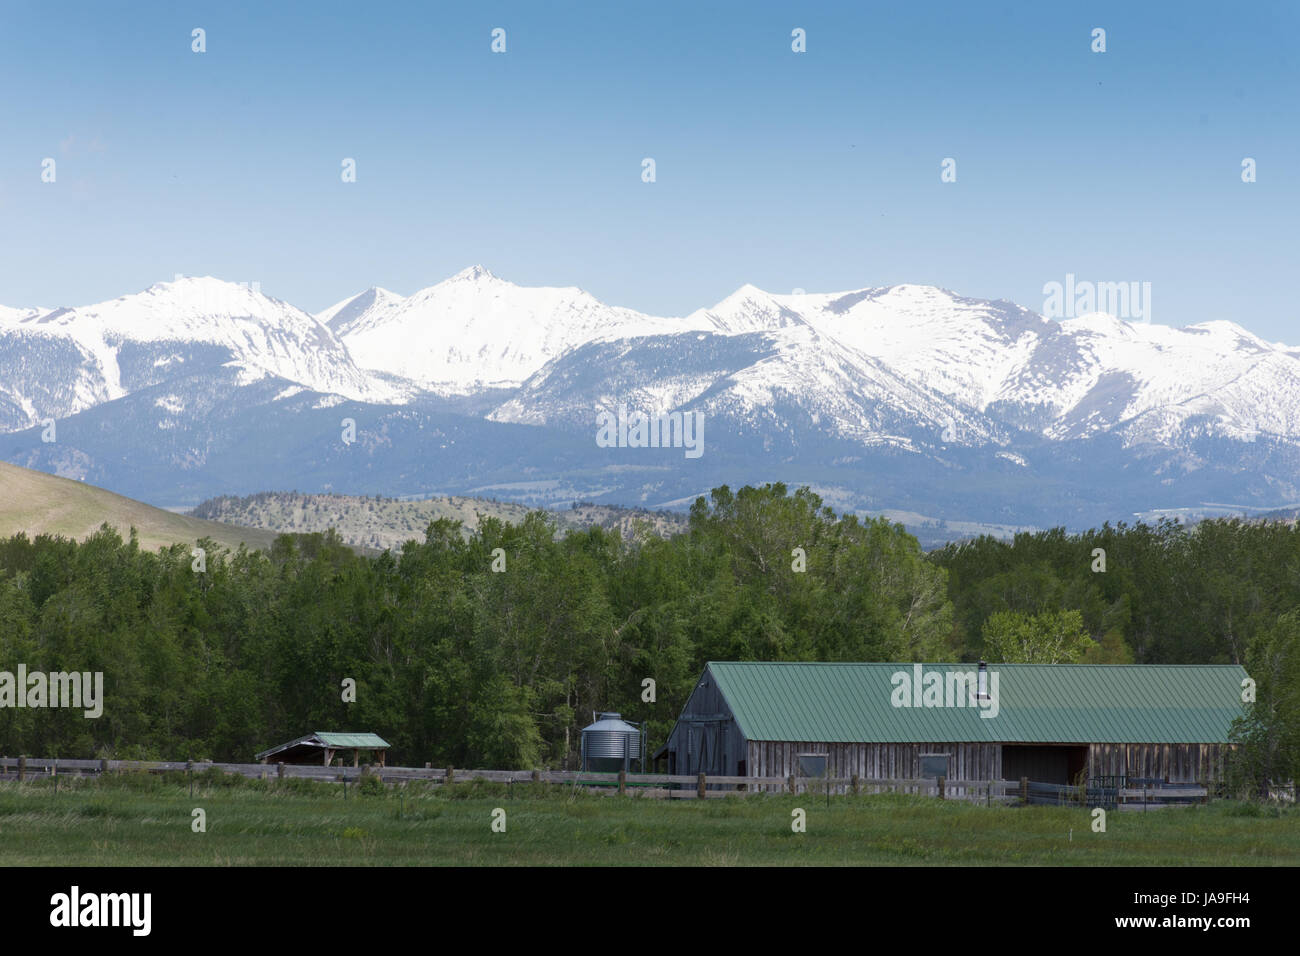 Barn in green field with fenced pasture in foreground with rugged snow capped mountains in the background. Stock Photo